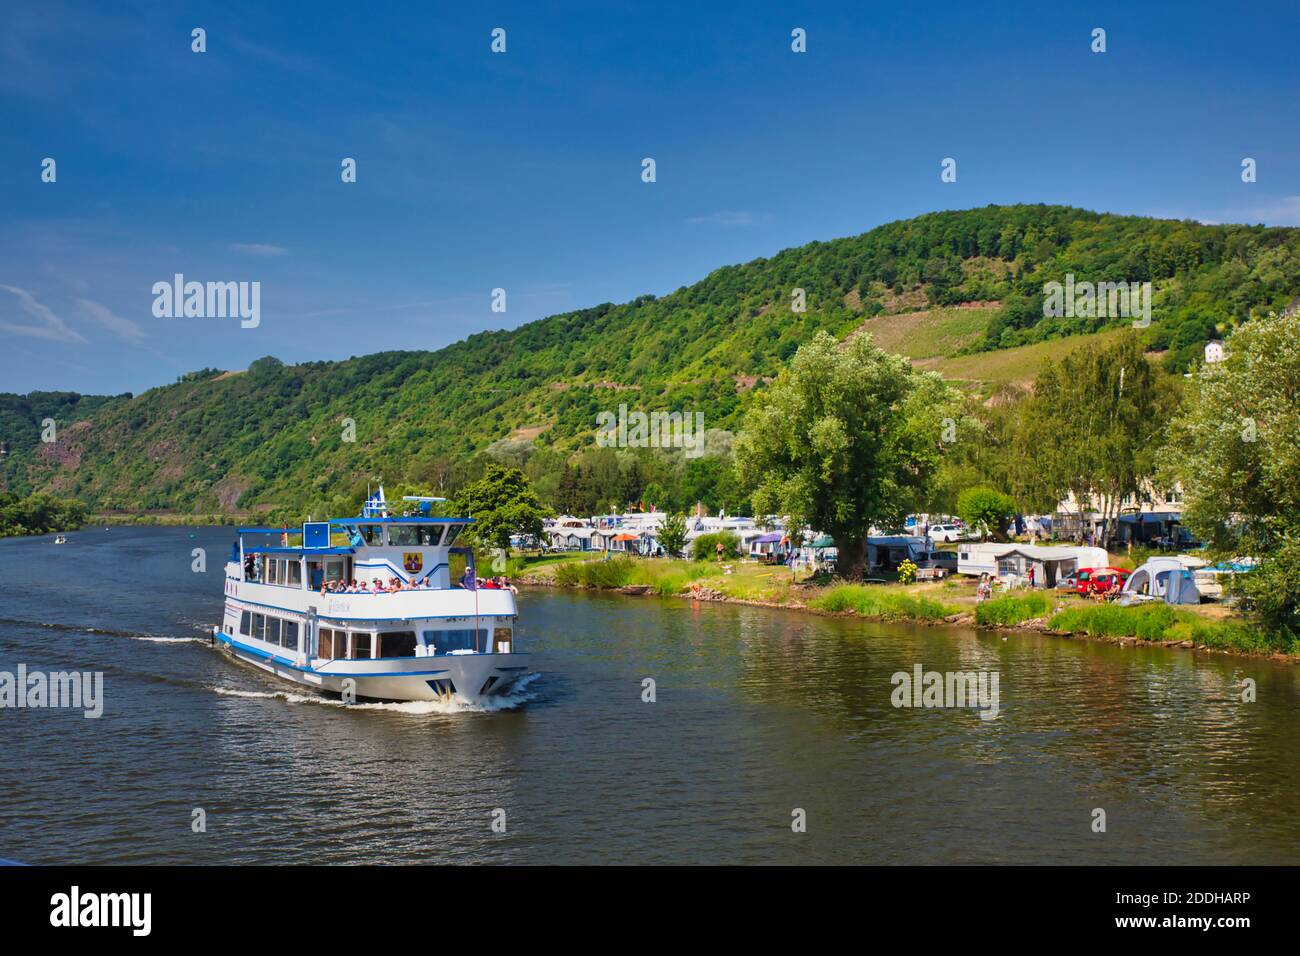 A cruise boat on the River Rhine in Germany passes by a large campsite on the river banks with hillside beyond Stock Photo